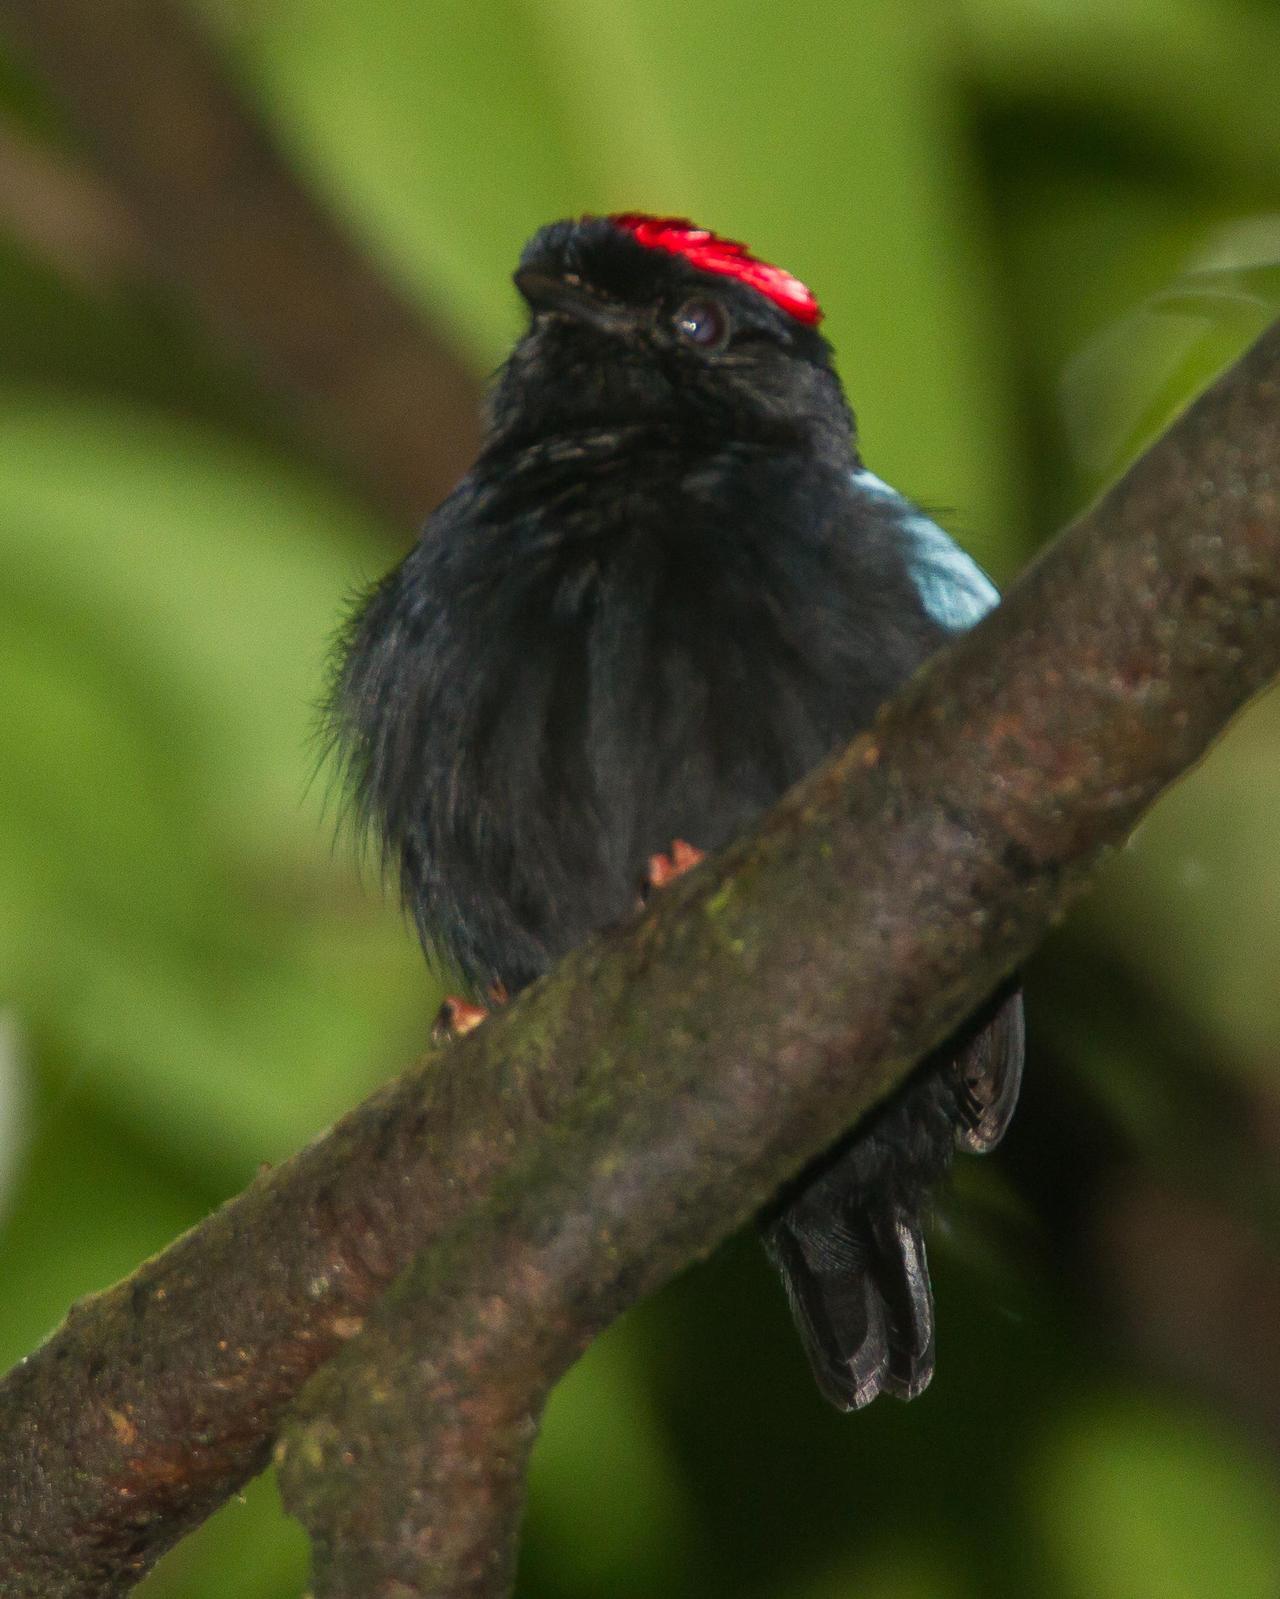 Blue-backed Manakin Photo by Robert Lewis